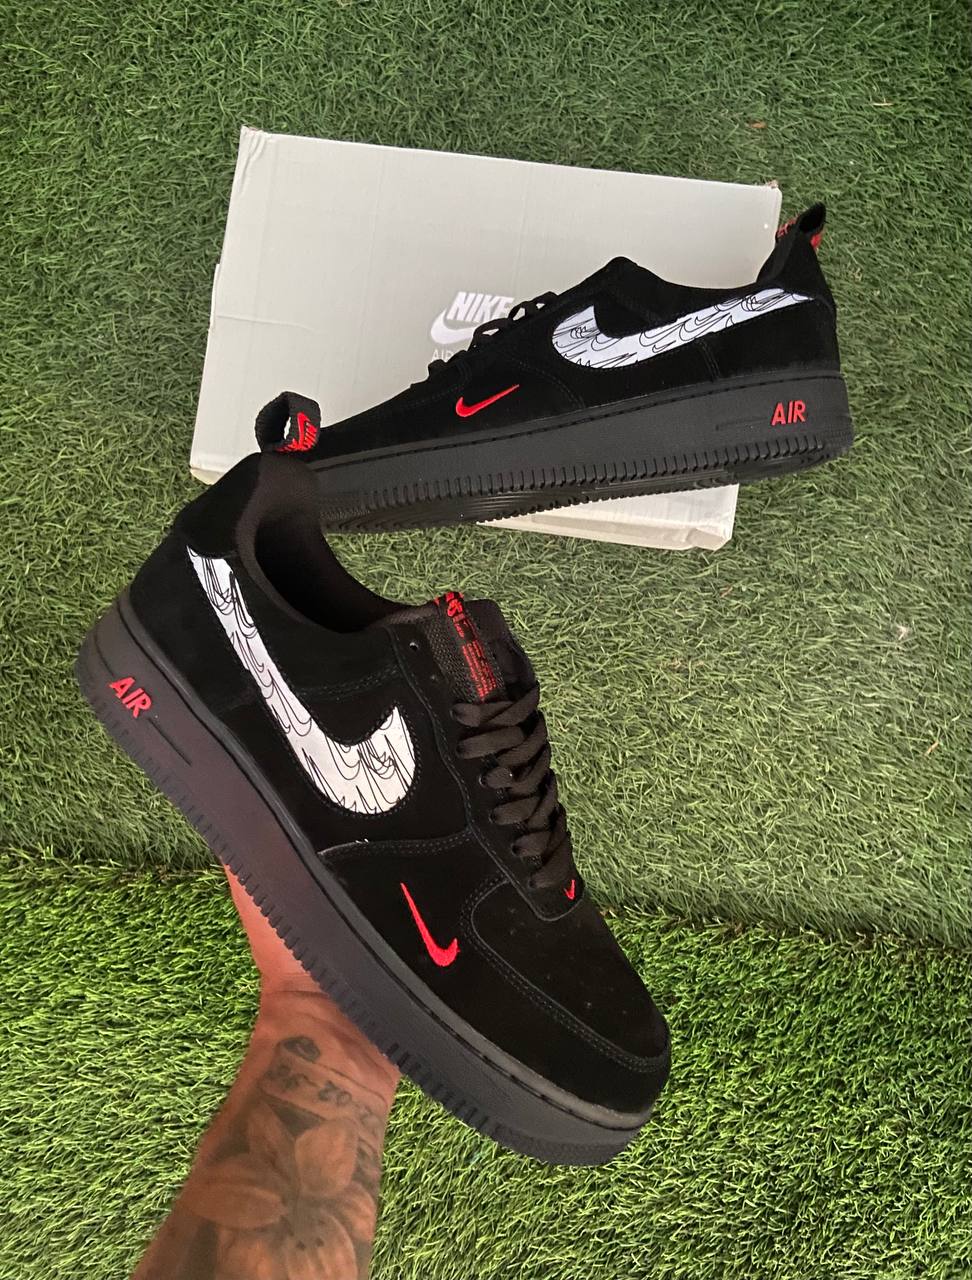 NIKE AIR FORCE 1 LV8 BLACK SOFT SUEDE RED TICK